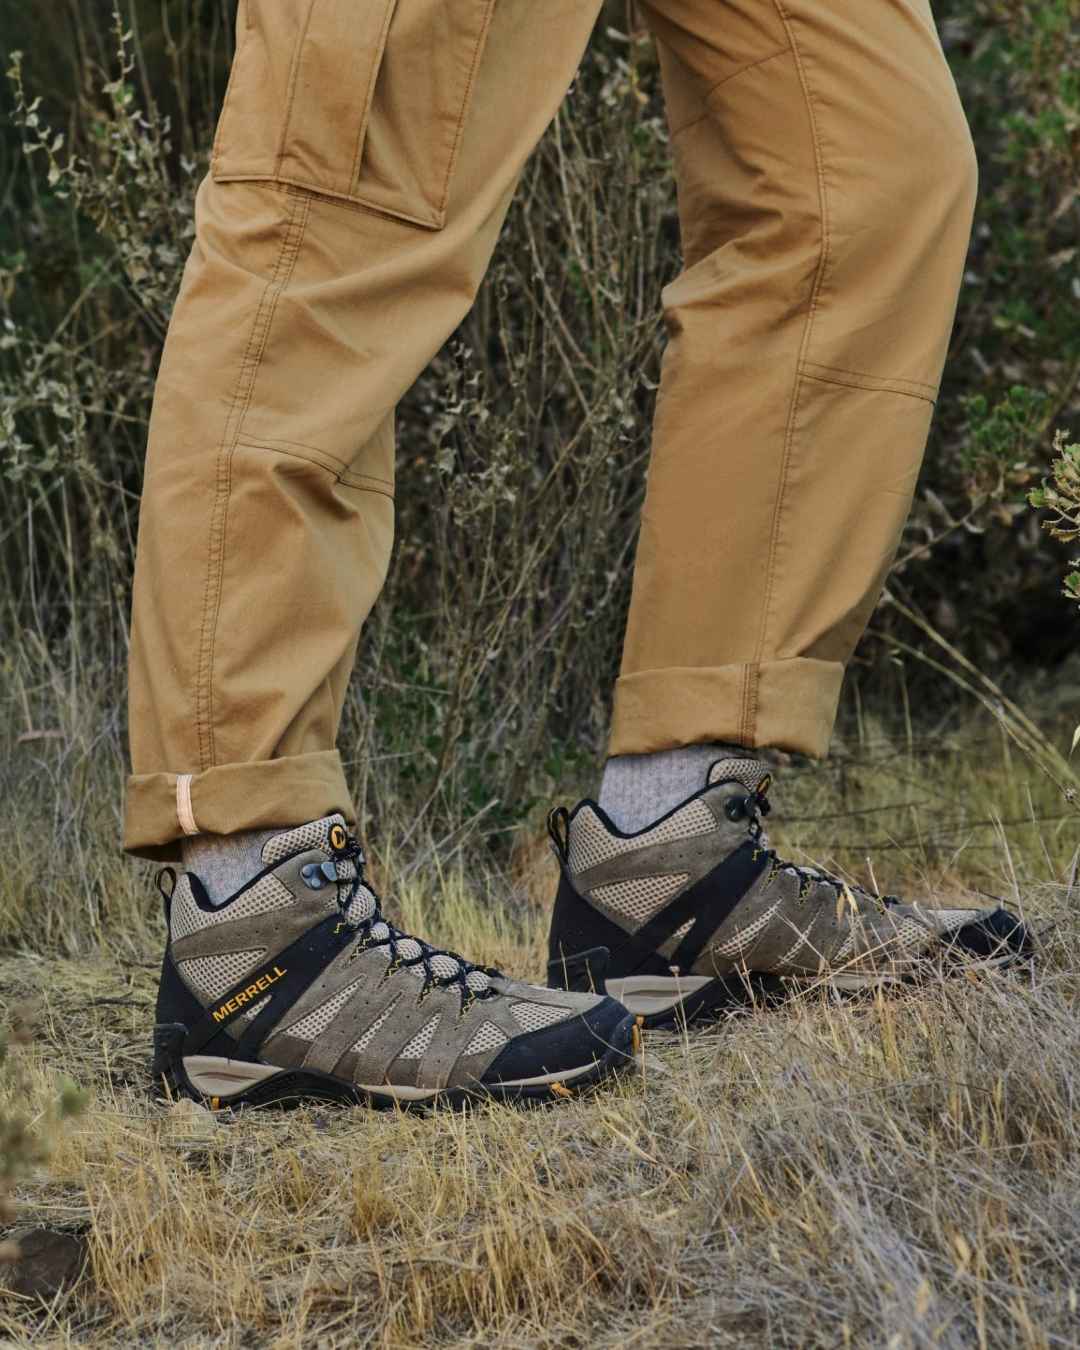 A person's legs from the thighs down wearing camel coloured hiking pants and shoes